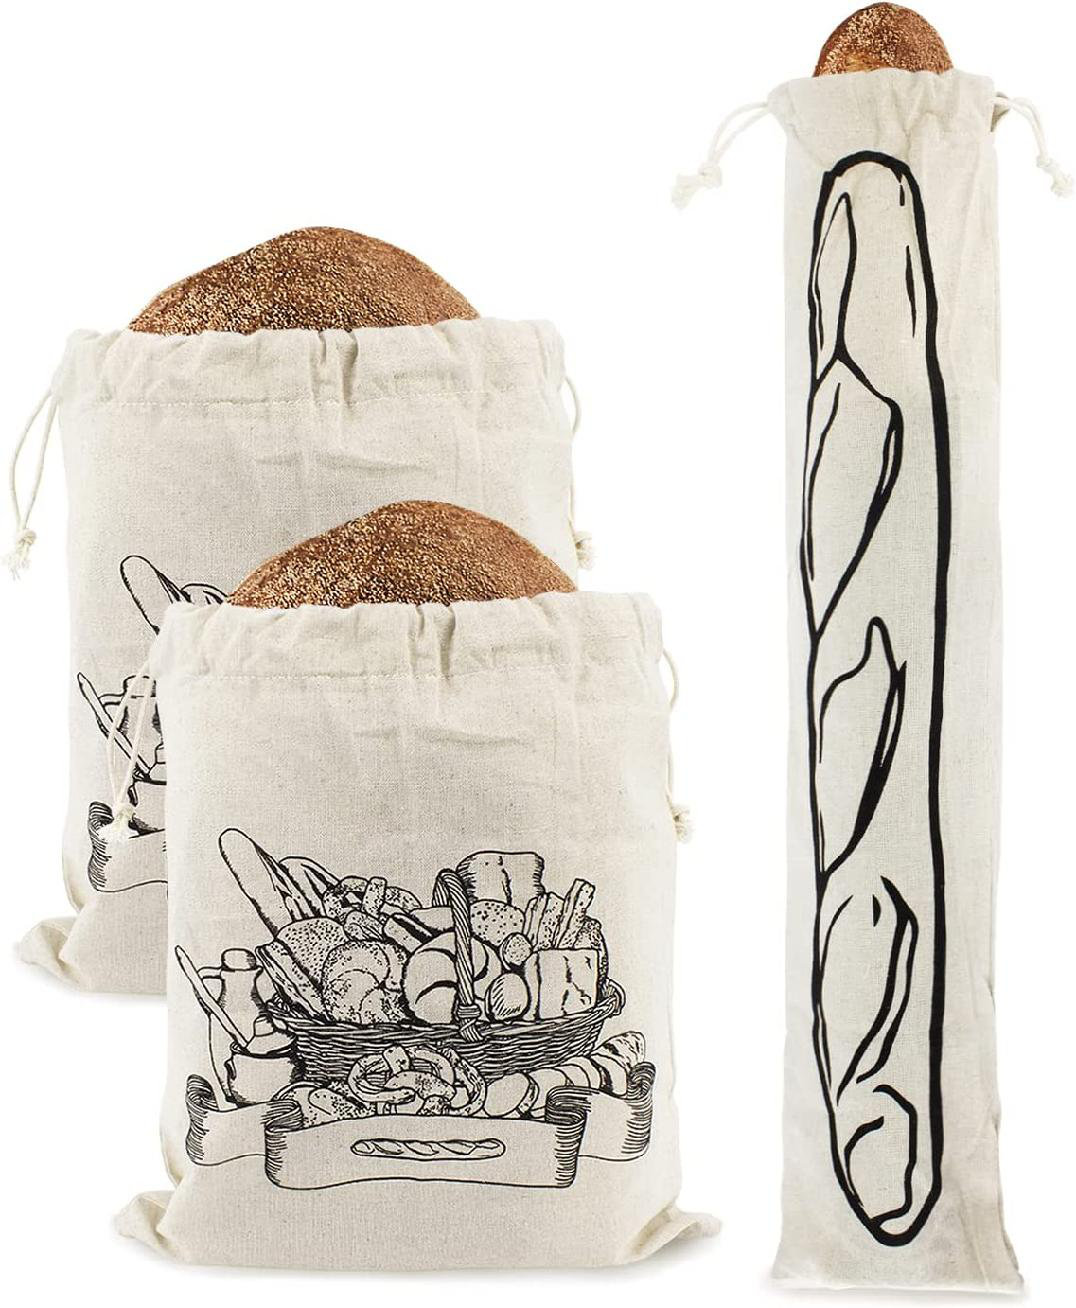 Linen Bread Bags For Food Storage With Drawstring